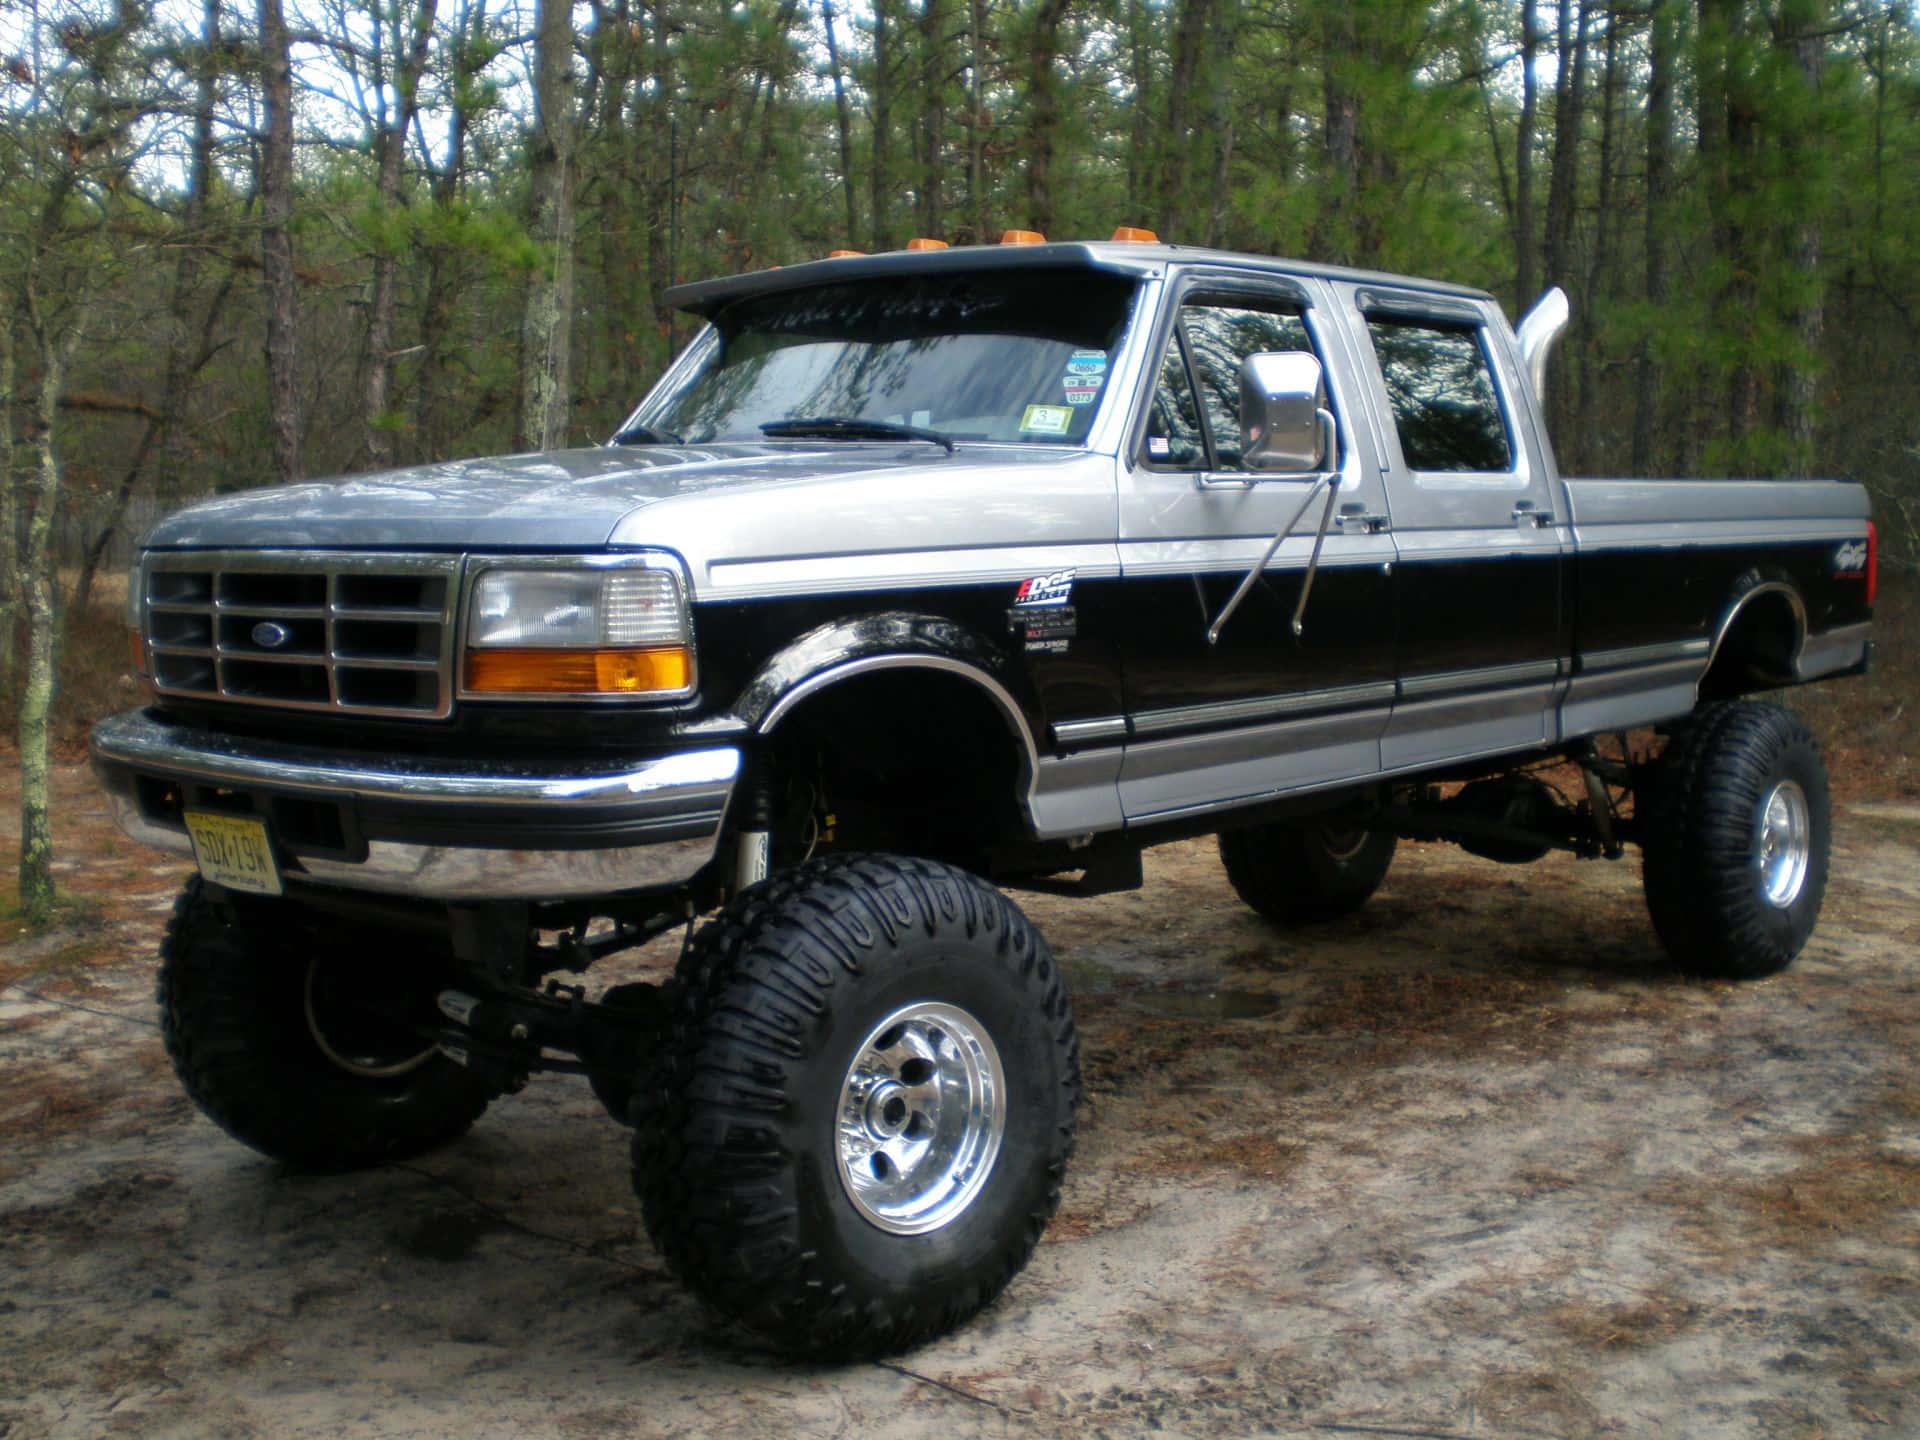 A Silver Truck Parked In The Woods